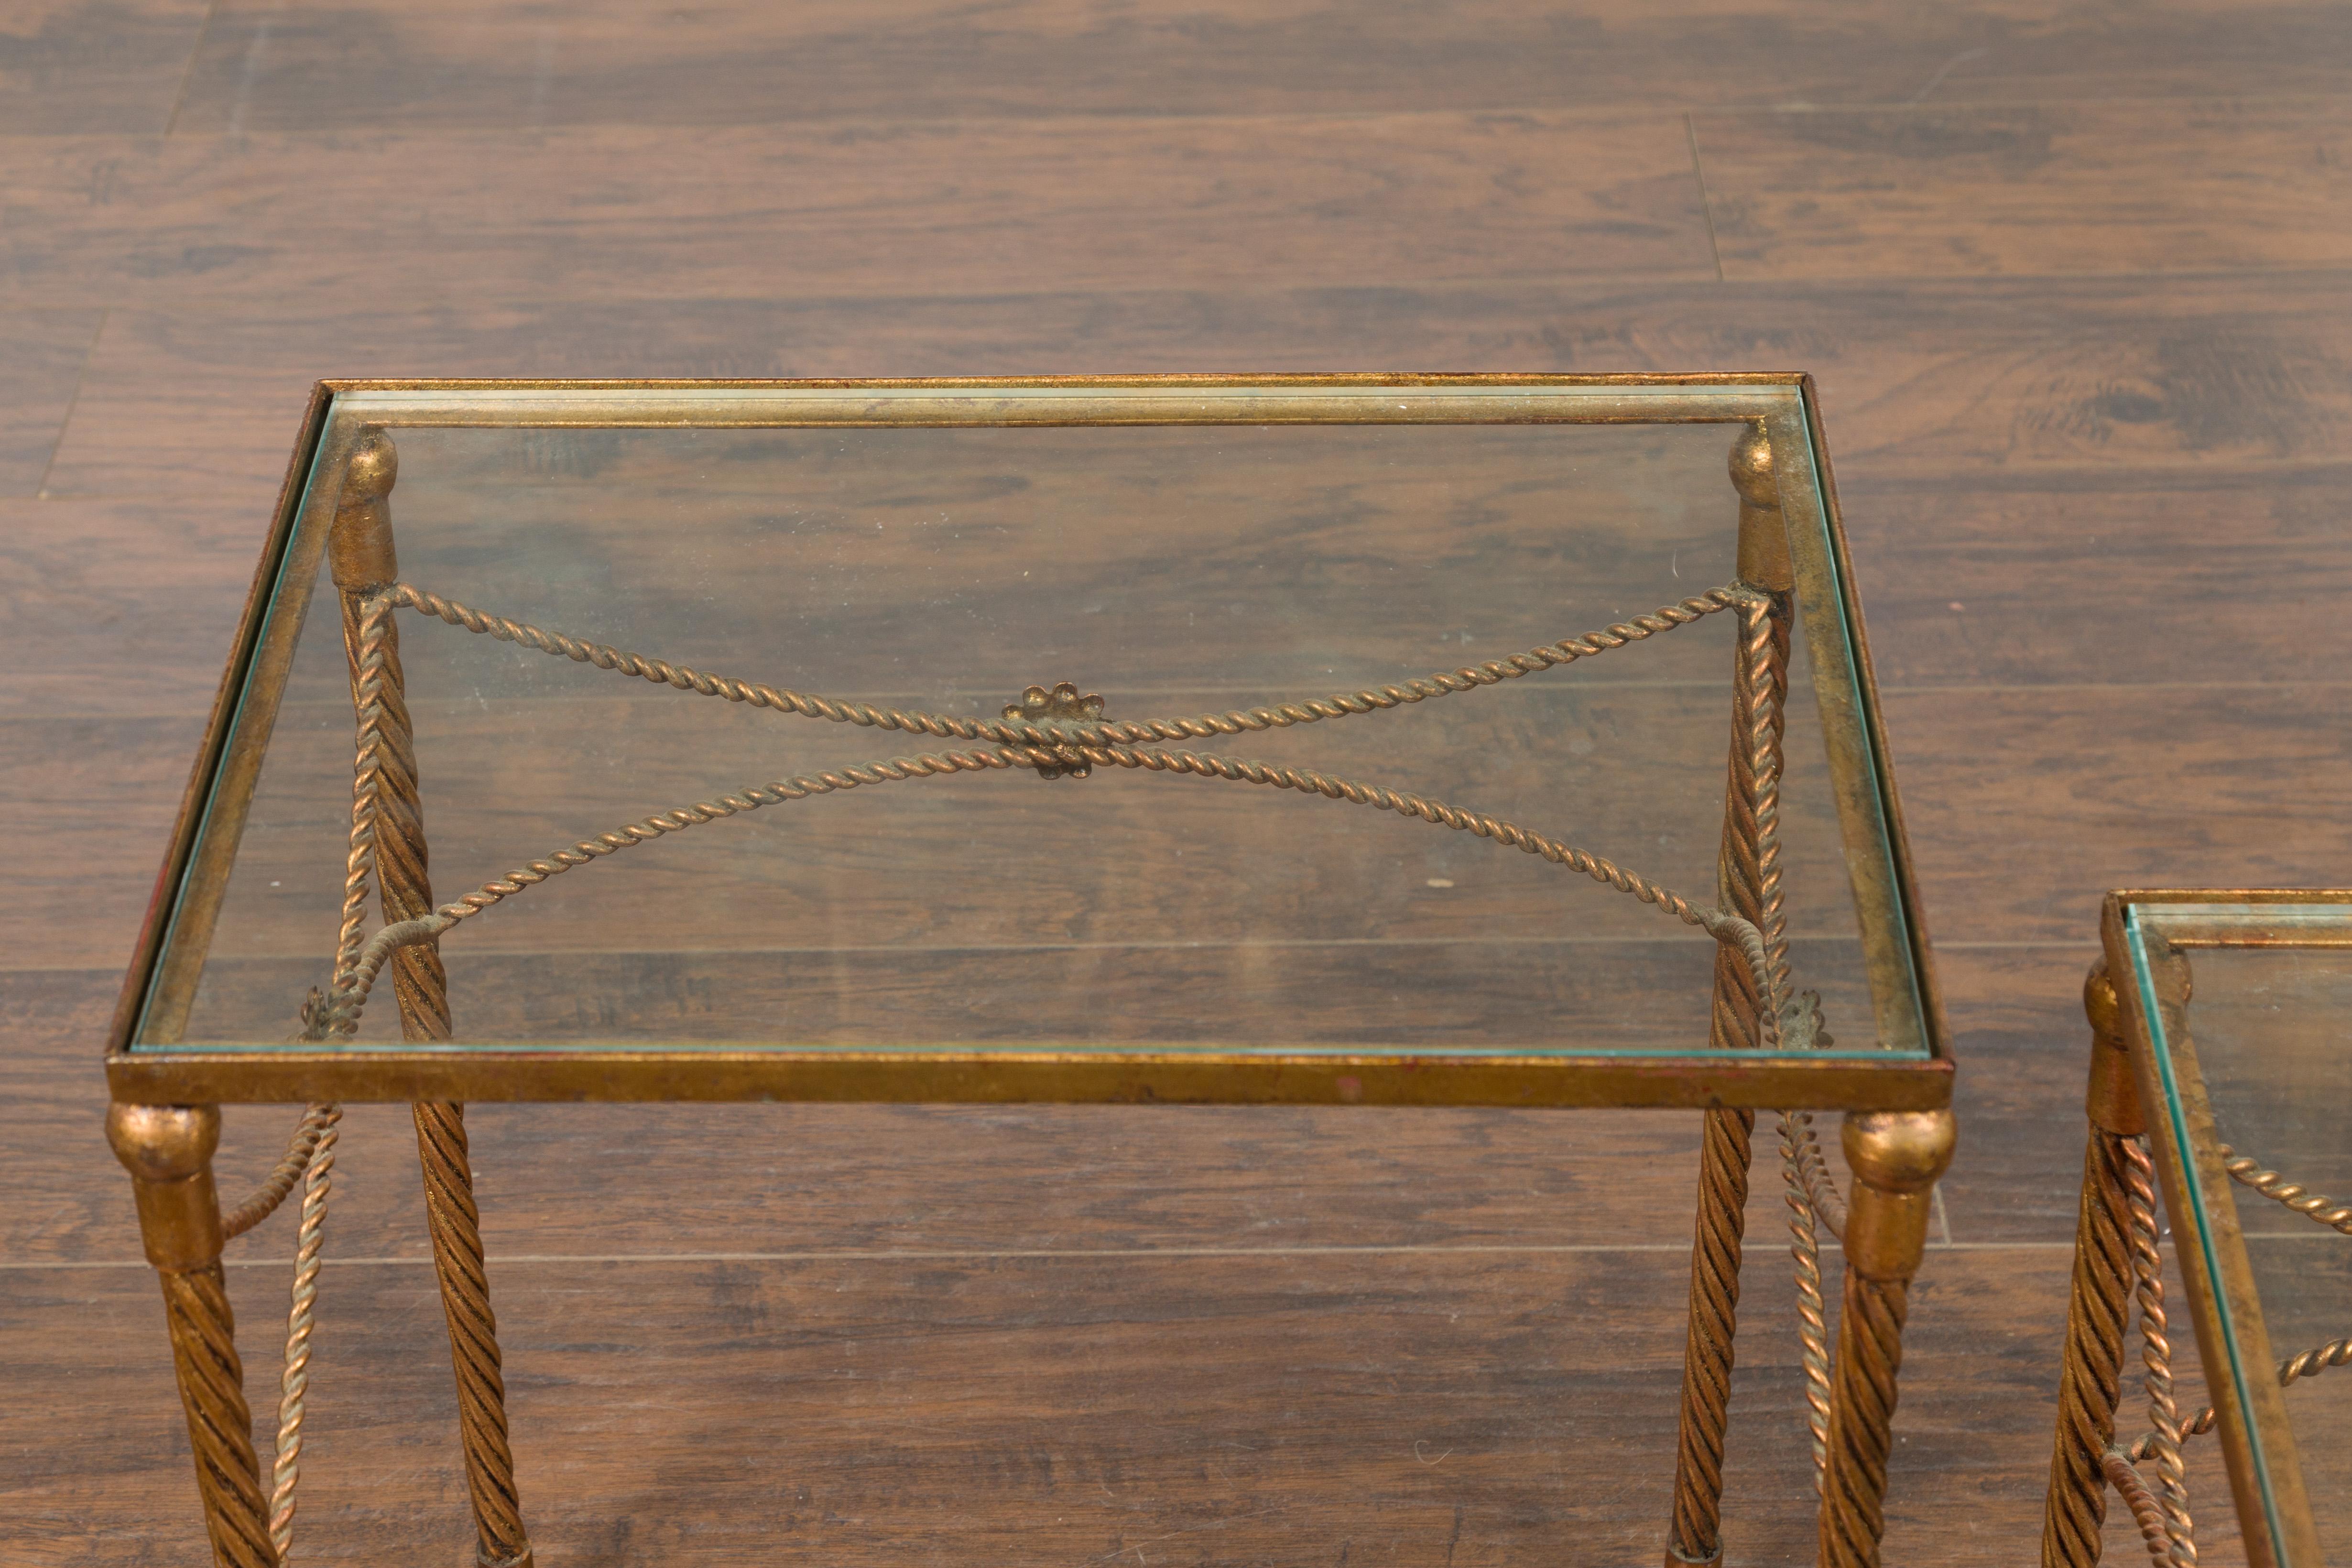 Pair of Vintage French Gilt Metal Midcentury Nesting Tables with Glass Tops For Sale 1